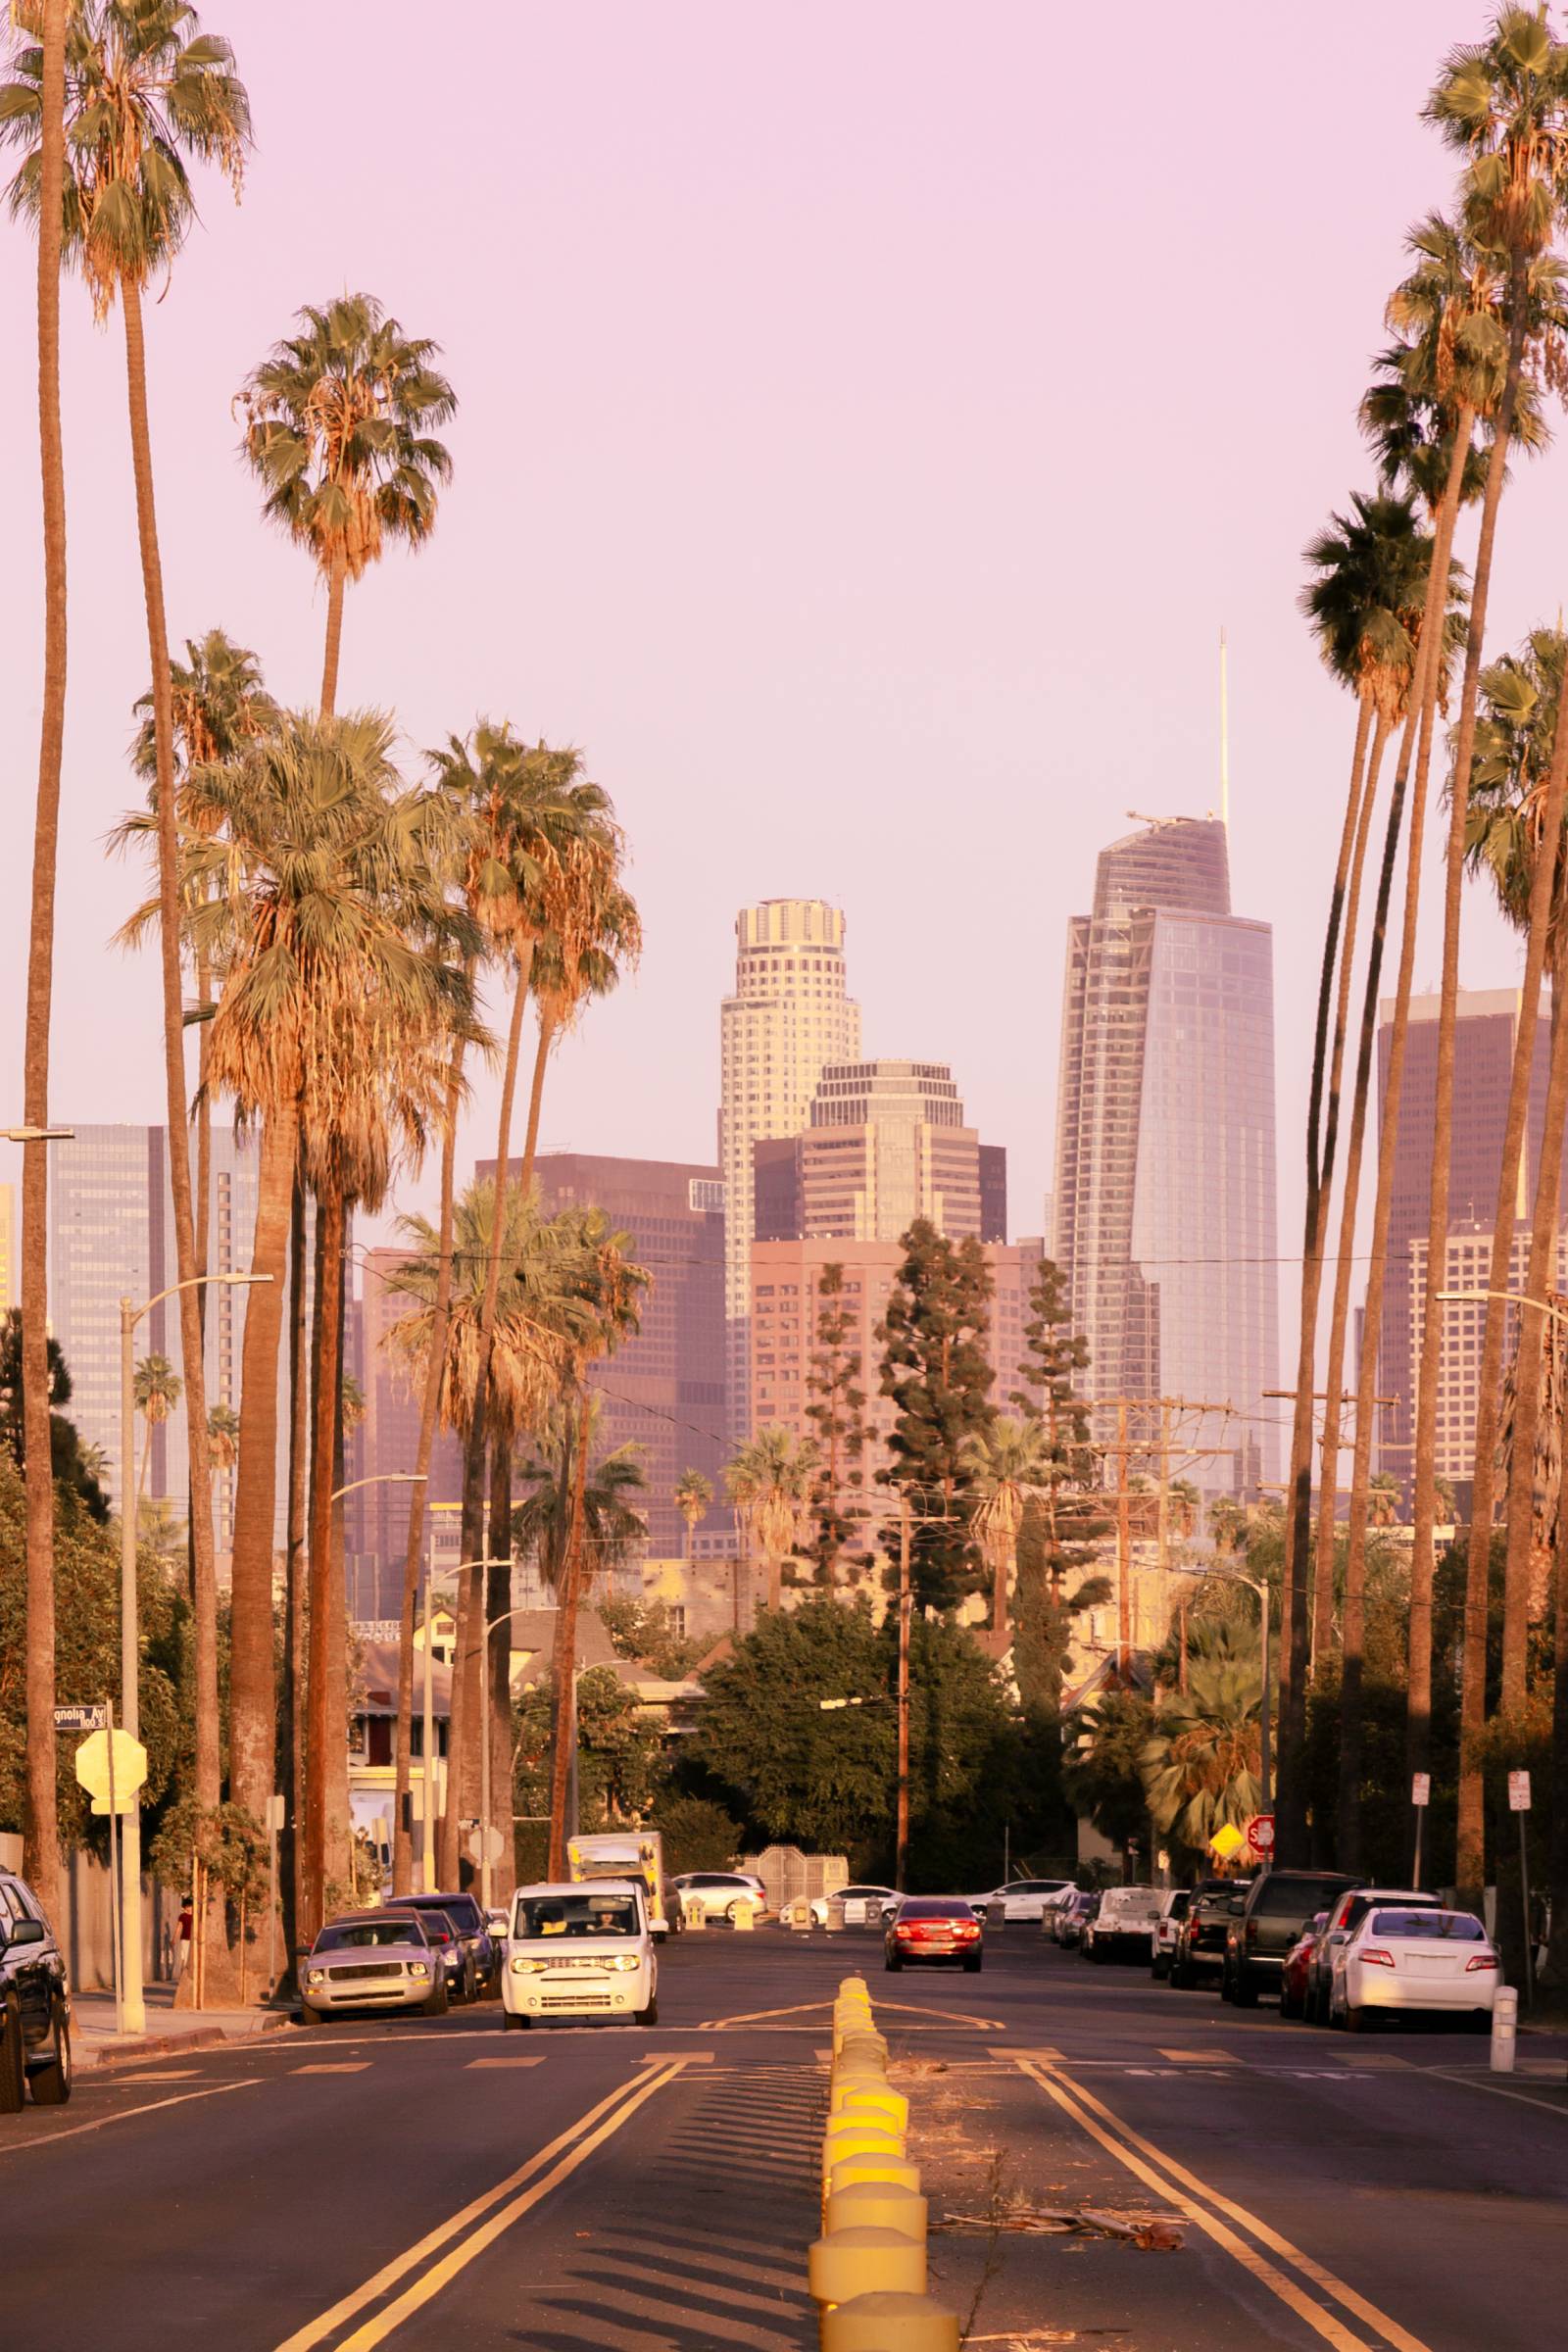 Los Angeles (Fot. Getty Images)